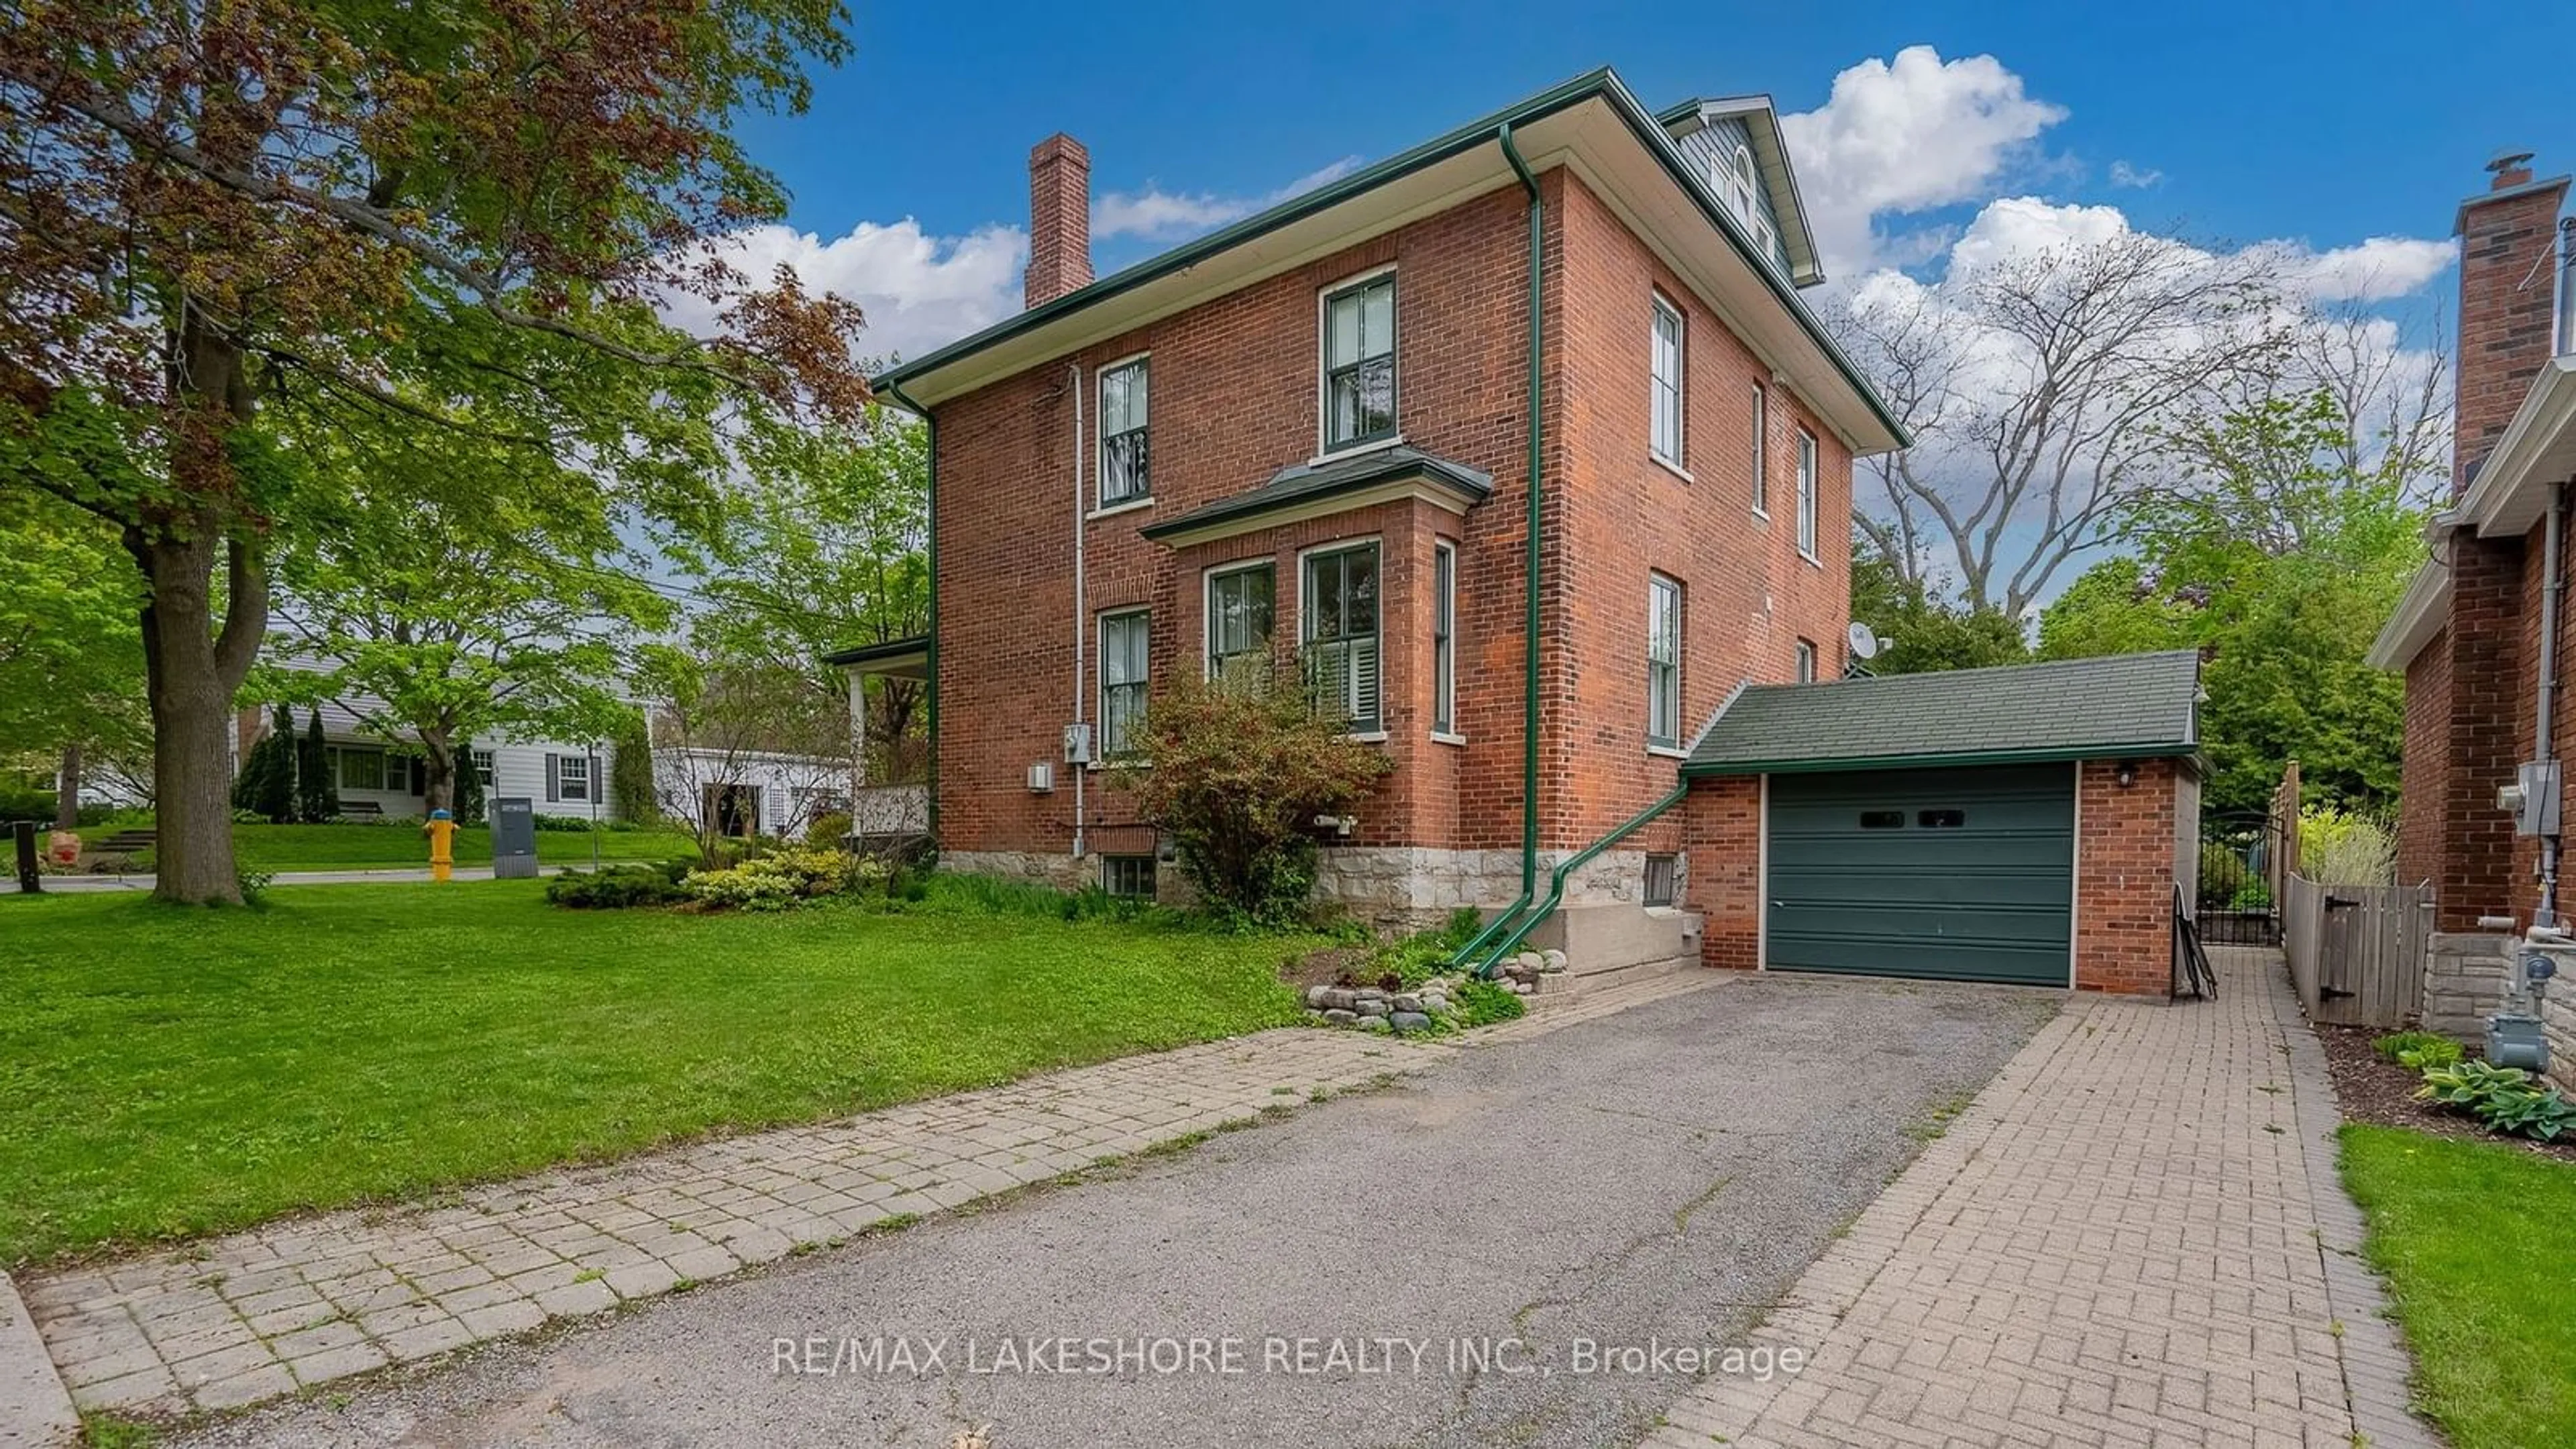 Home with brick exterior material for 183 James St, Cobourg Ontario K9A 1H5